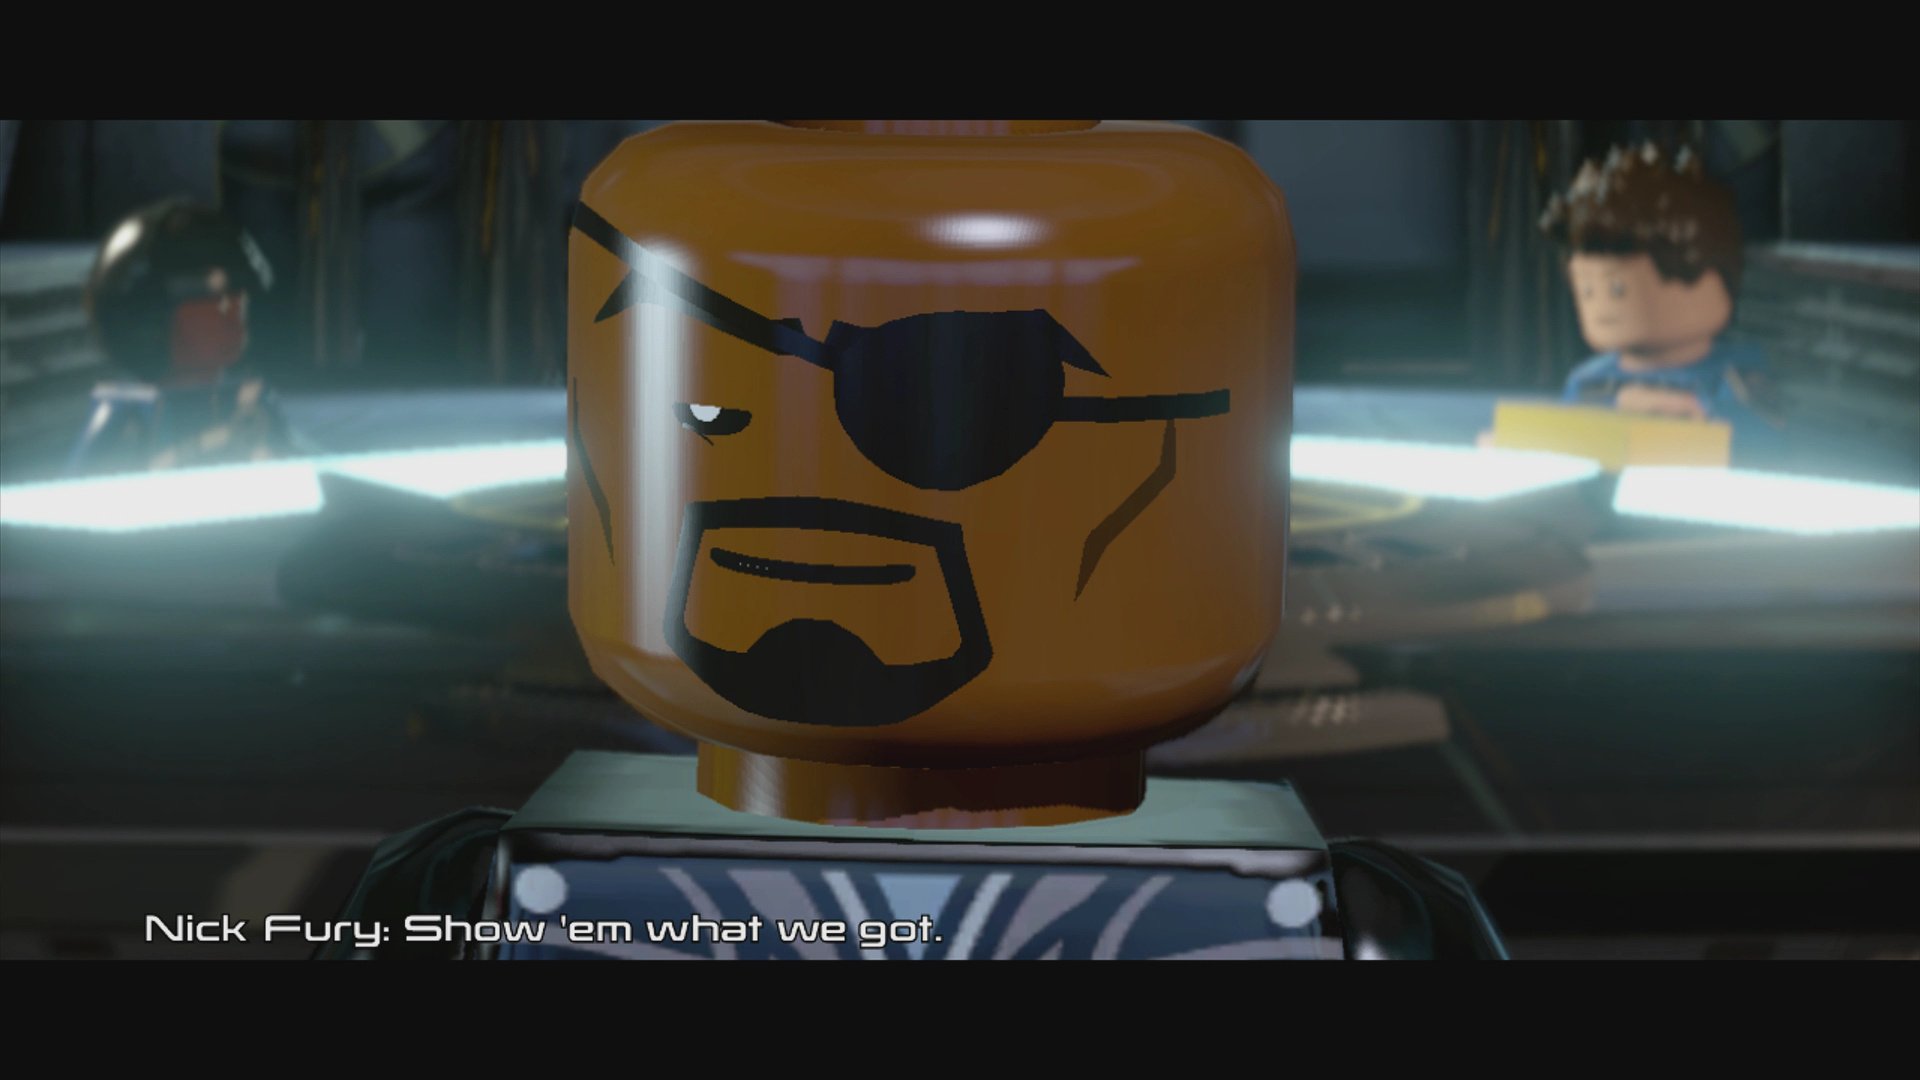  LEGO Marvel's Avengers - Wii U : Whv Games: Video Games